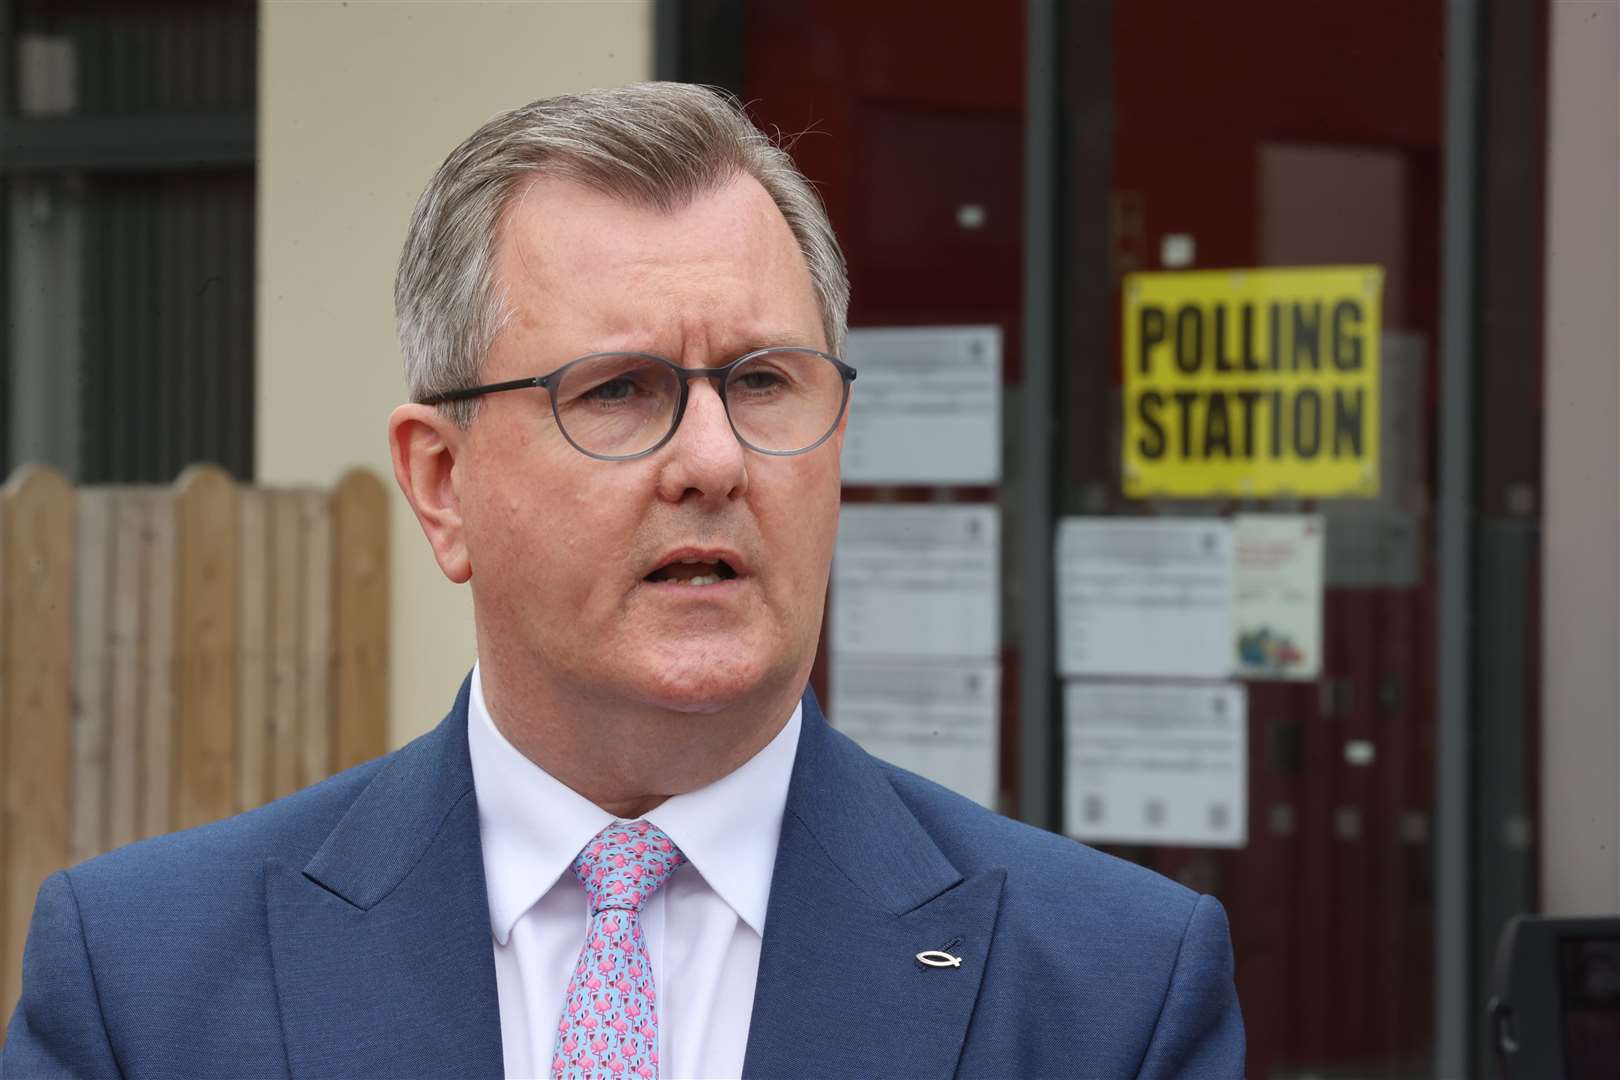 Leader of the DUP Sir Jeffrey Donaldson said the proposals could ‘end the logjam’ (PA)